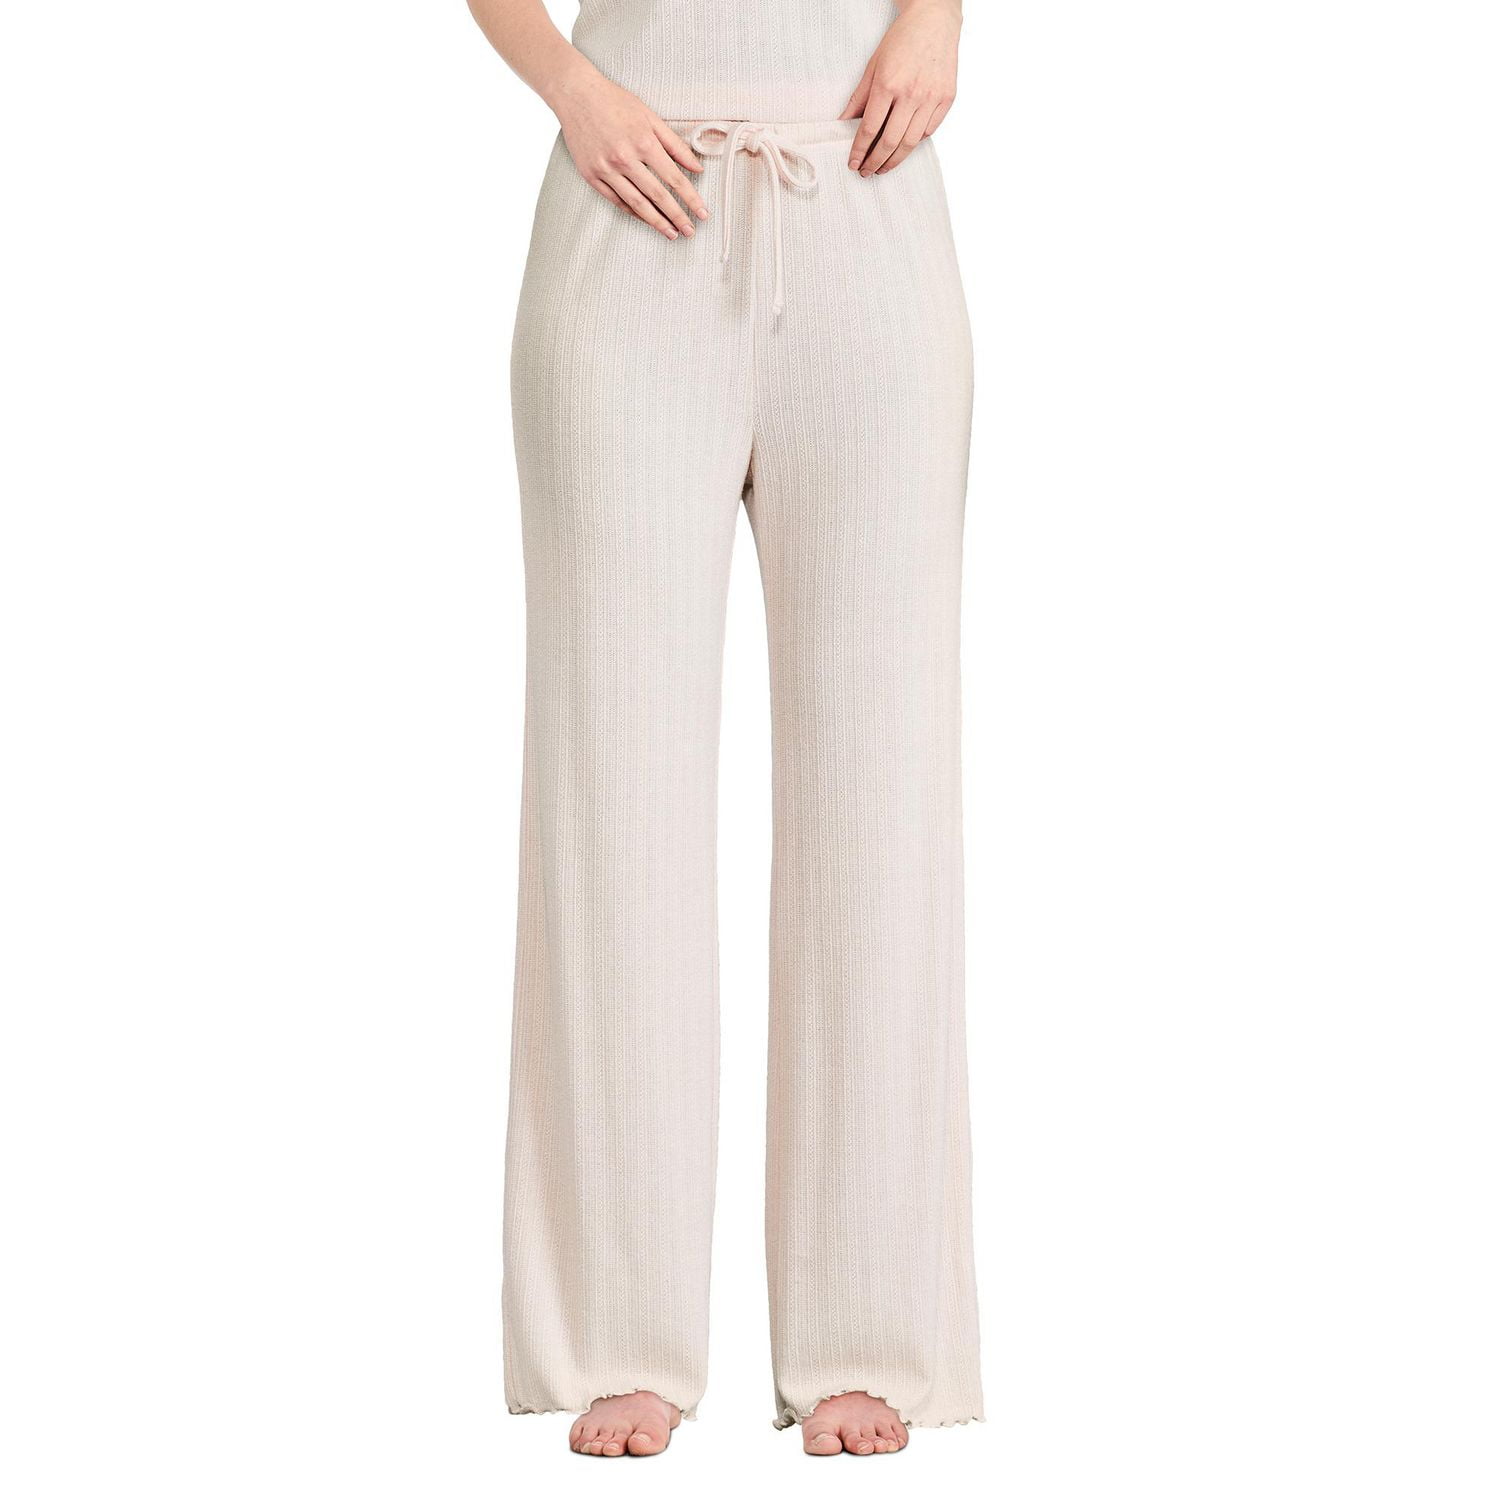 Relaxed Livin' White Waffle Knit High-Waisted Lounge Pants